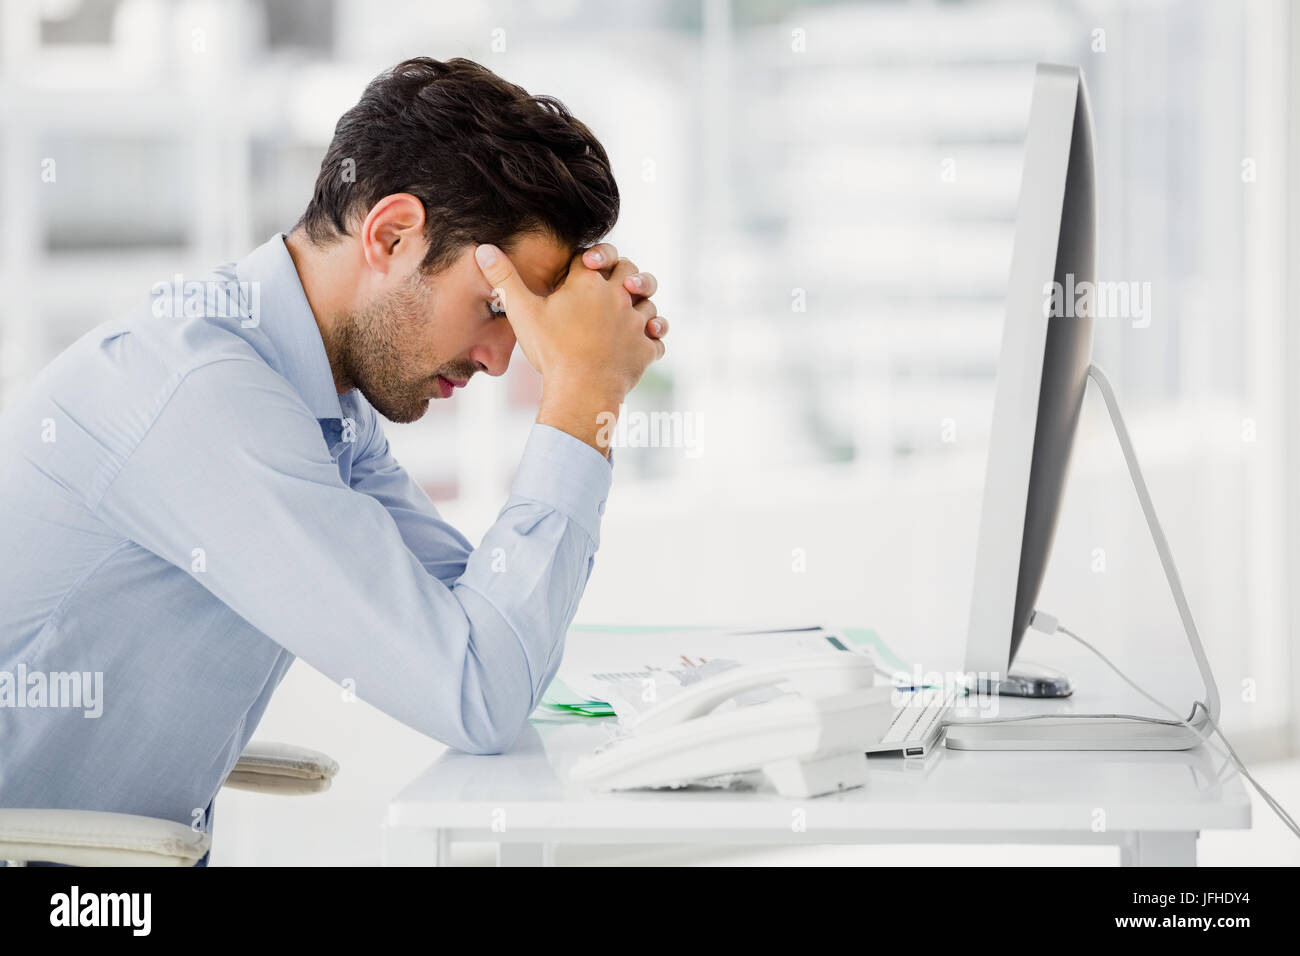 Frustrated businessman sitting on desk with hand on head Stock Photo